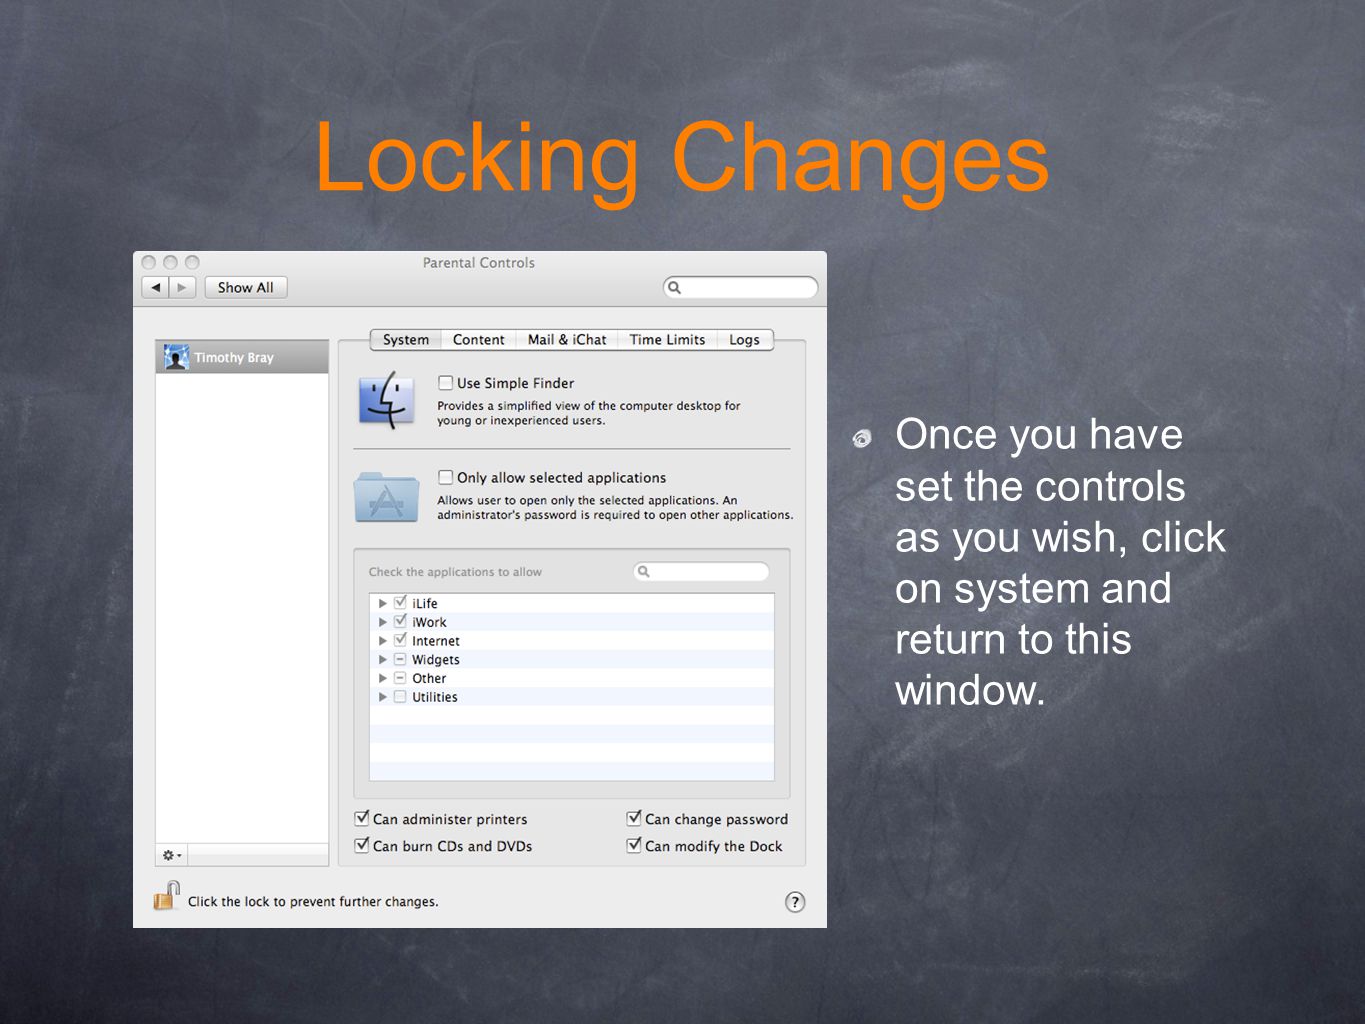 Locking Changes Once you have set the controls as you wish, click on system and return to this window.